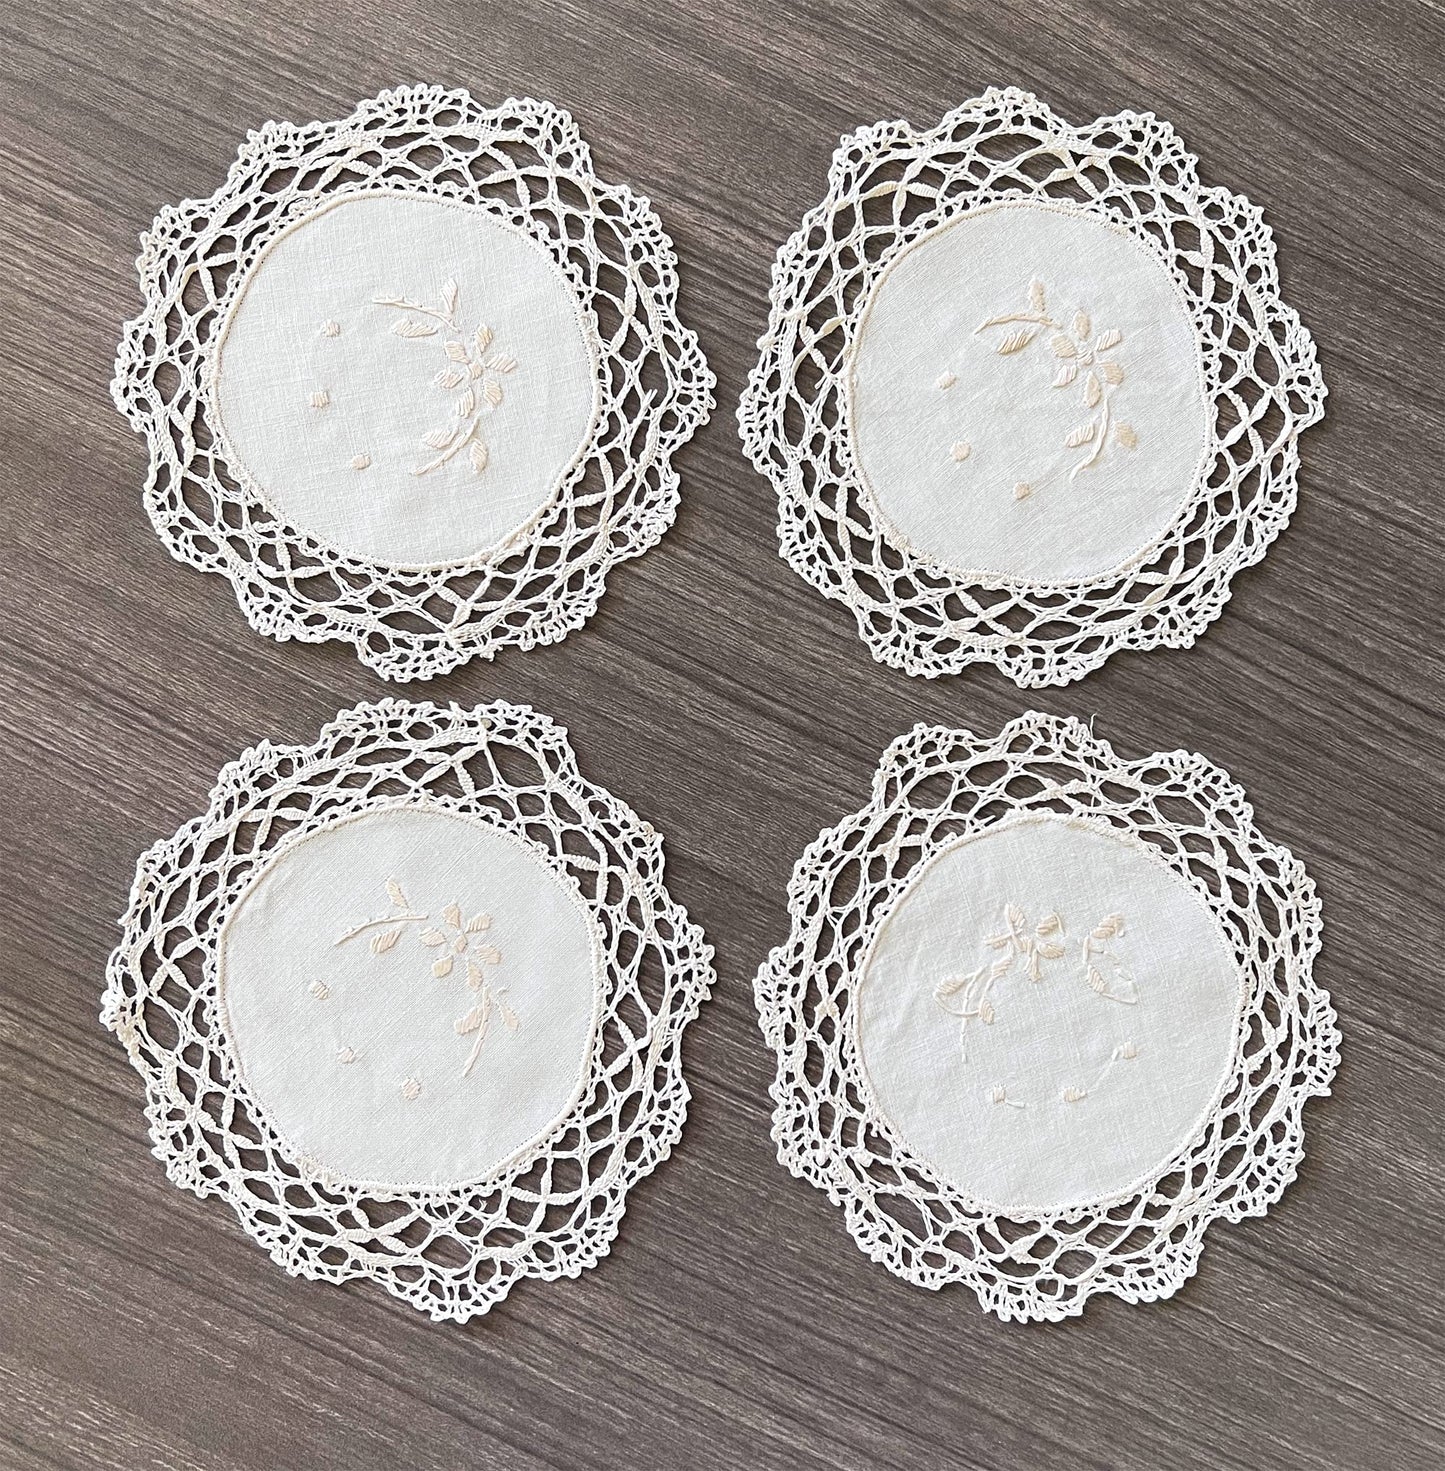 Fennco Styles Handmade Cluny Lace Embroidered Doily - Ivory Traycloth Doily for Home Décor, Banquets, Holidays, Weddings and Special Occasions